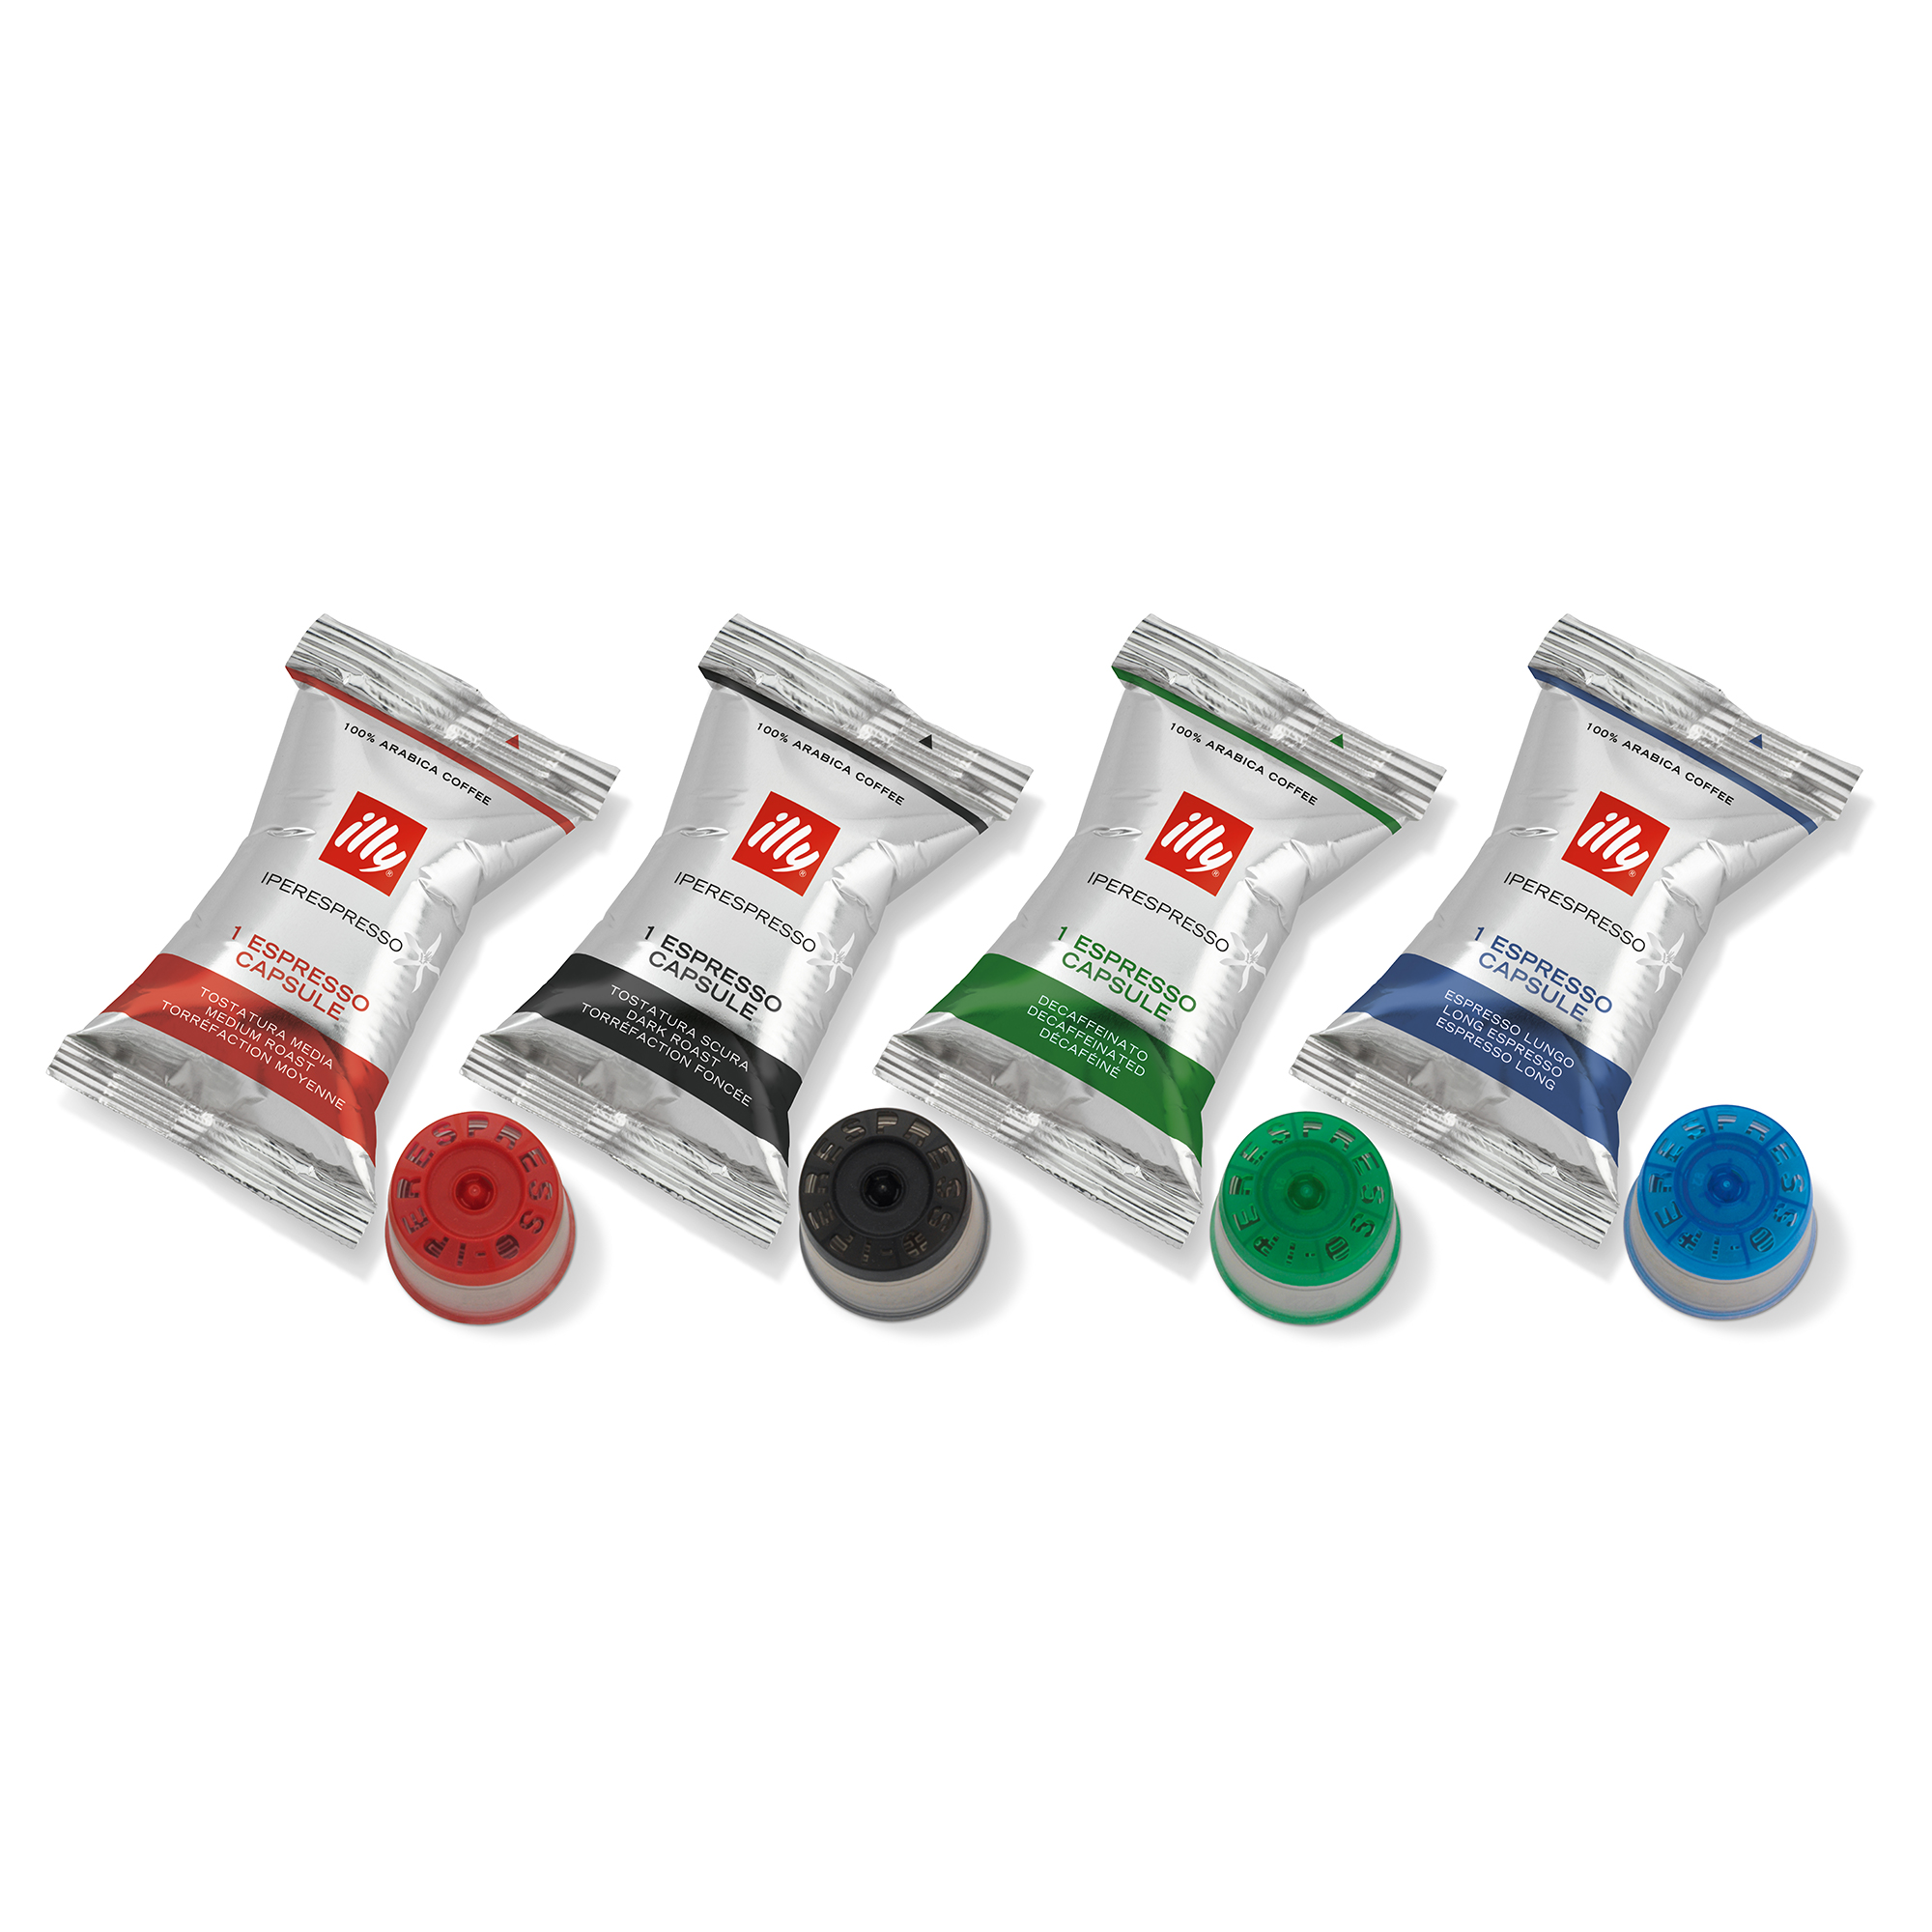 illy iperEspresso Capsule Singles Variety Pack